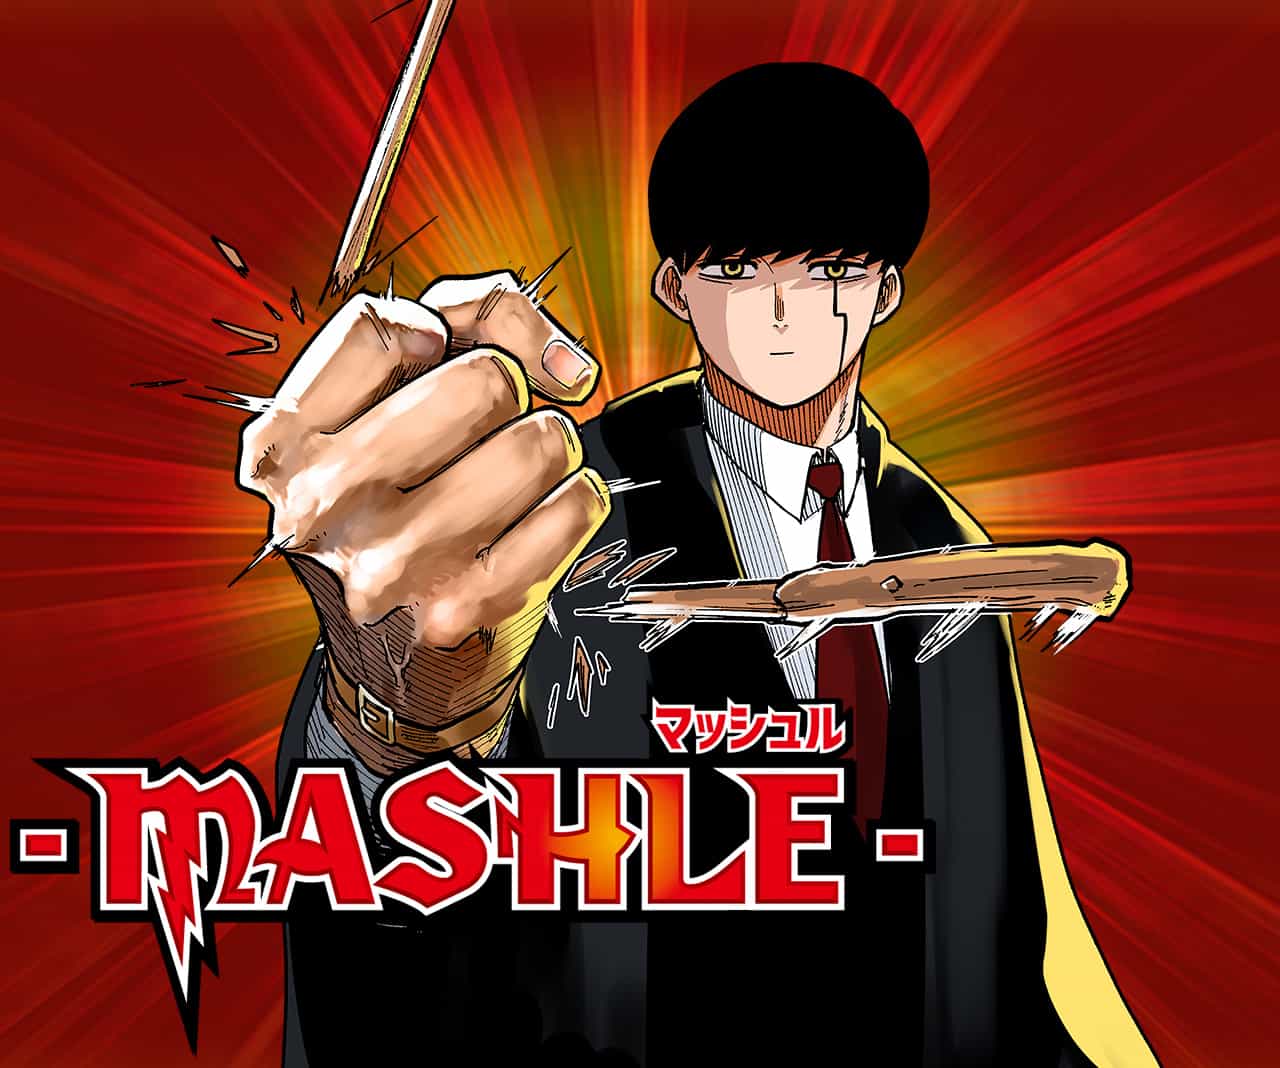 Mashle Episode 1 Review: Magic And Muscles